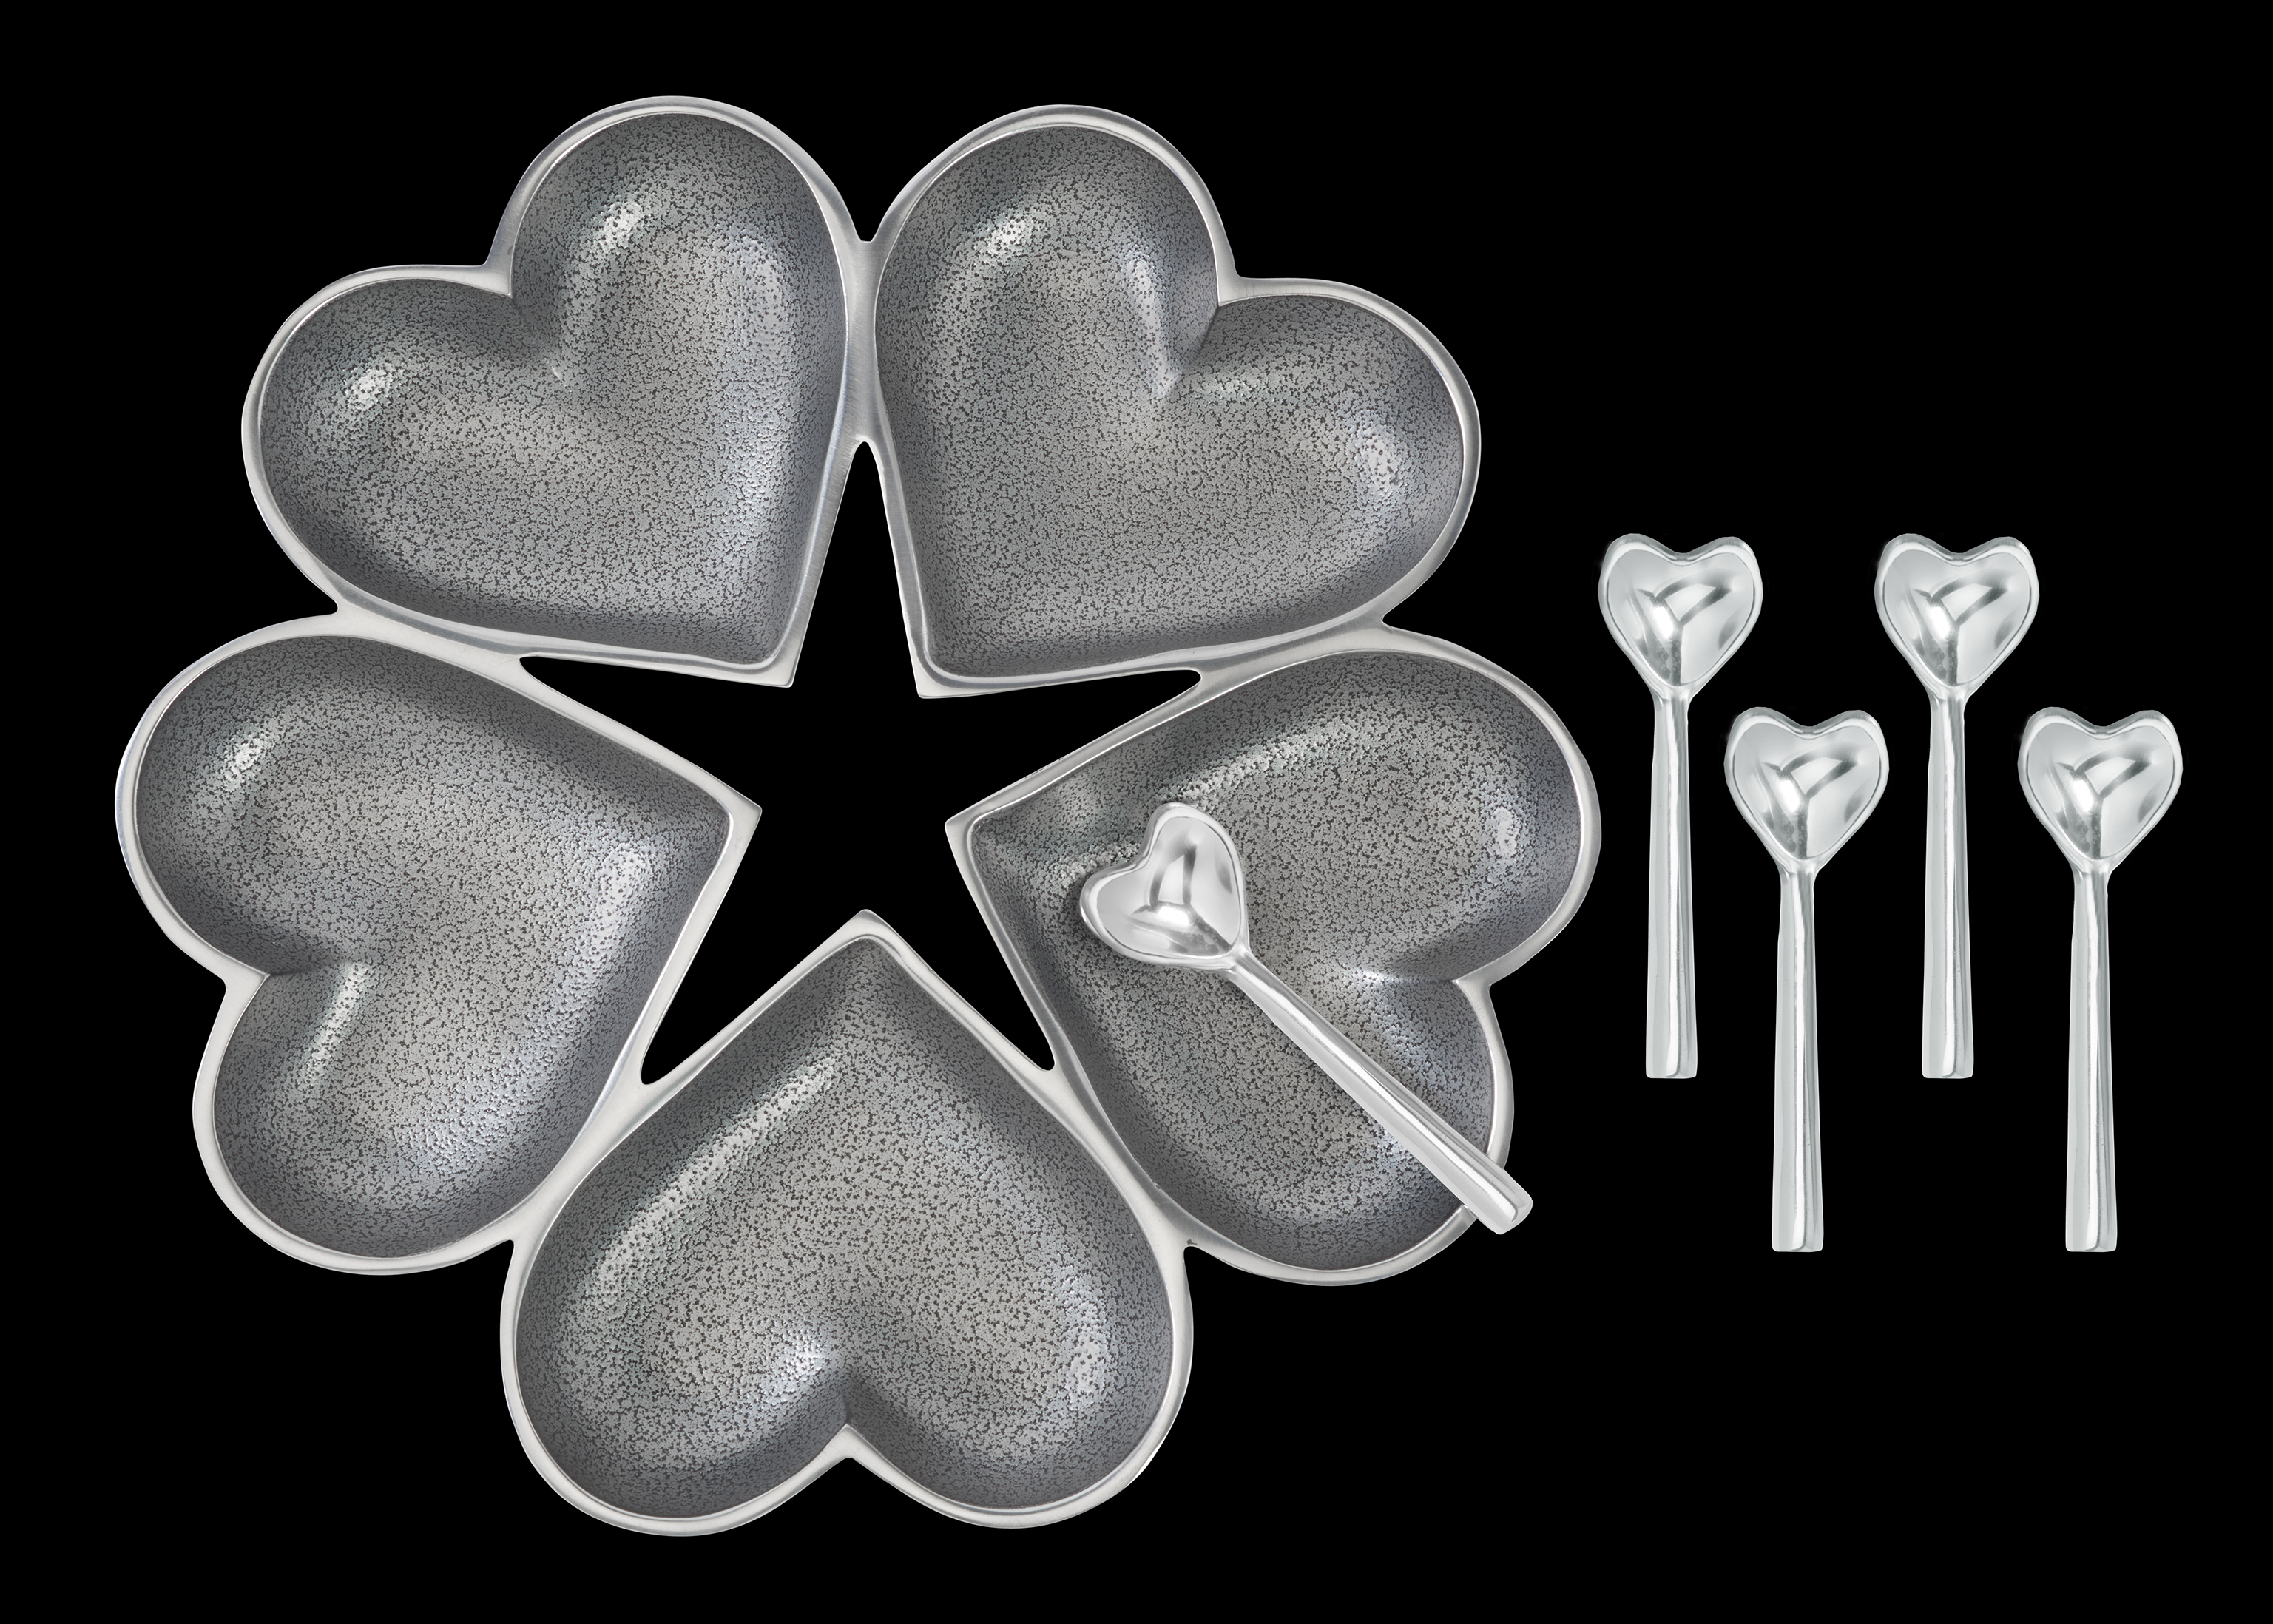 5 Hearts Platter with 5 Heart Spoons - Silver